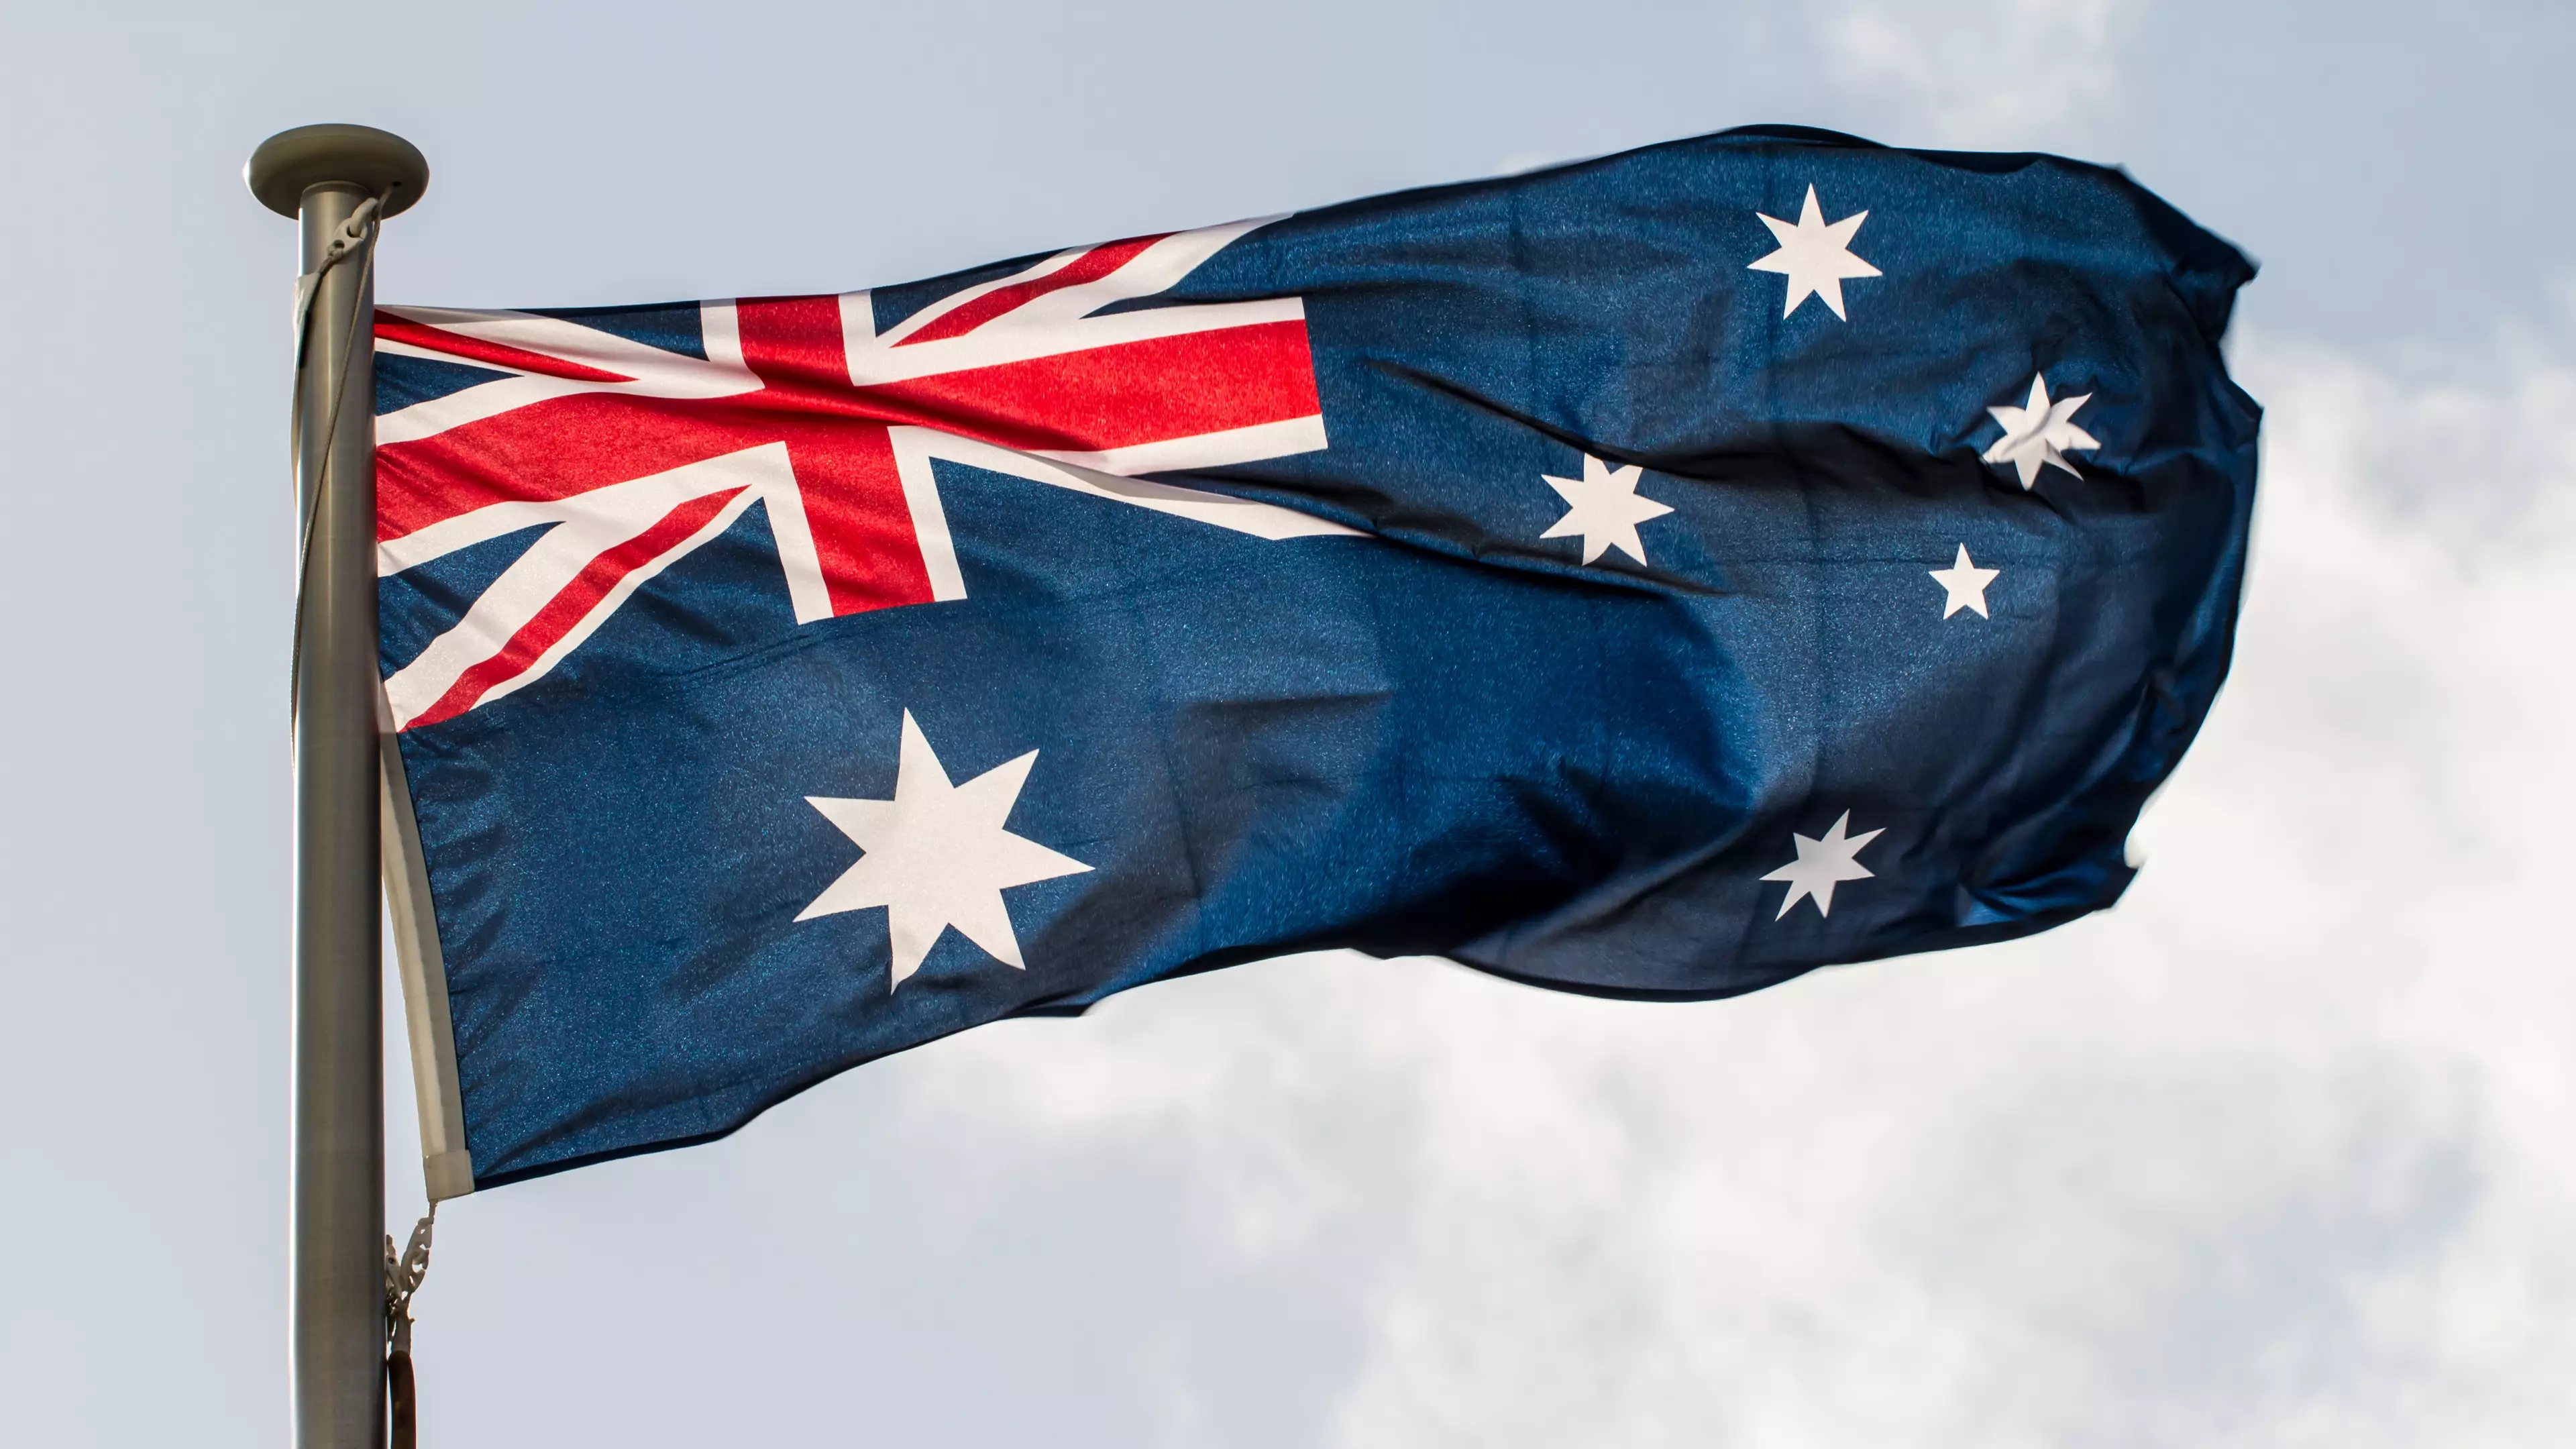 Politician Suggests Changing One Word In Australia's National Anthem To Prevent Boycotts